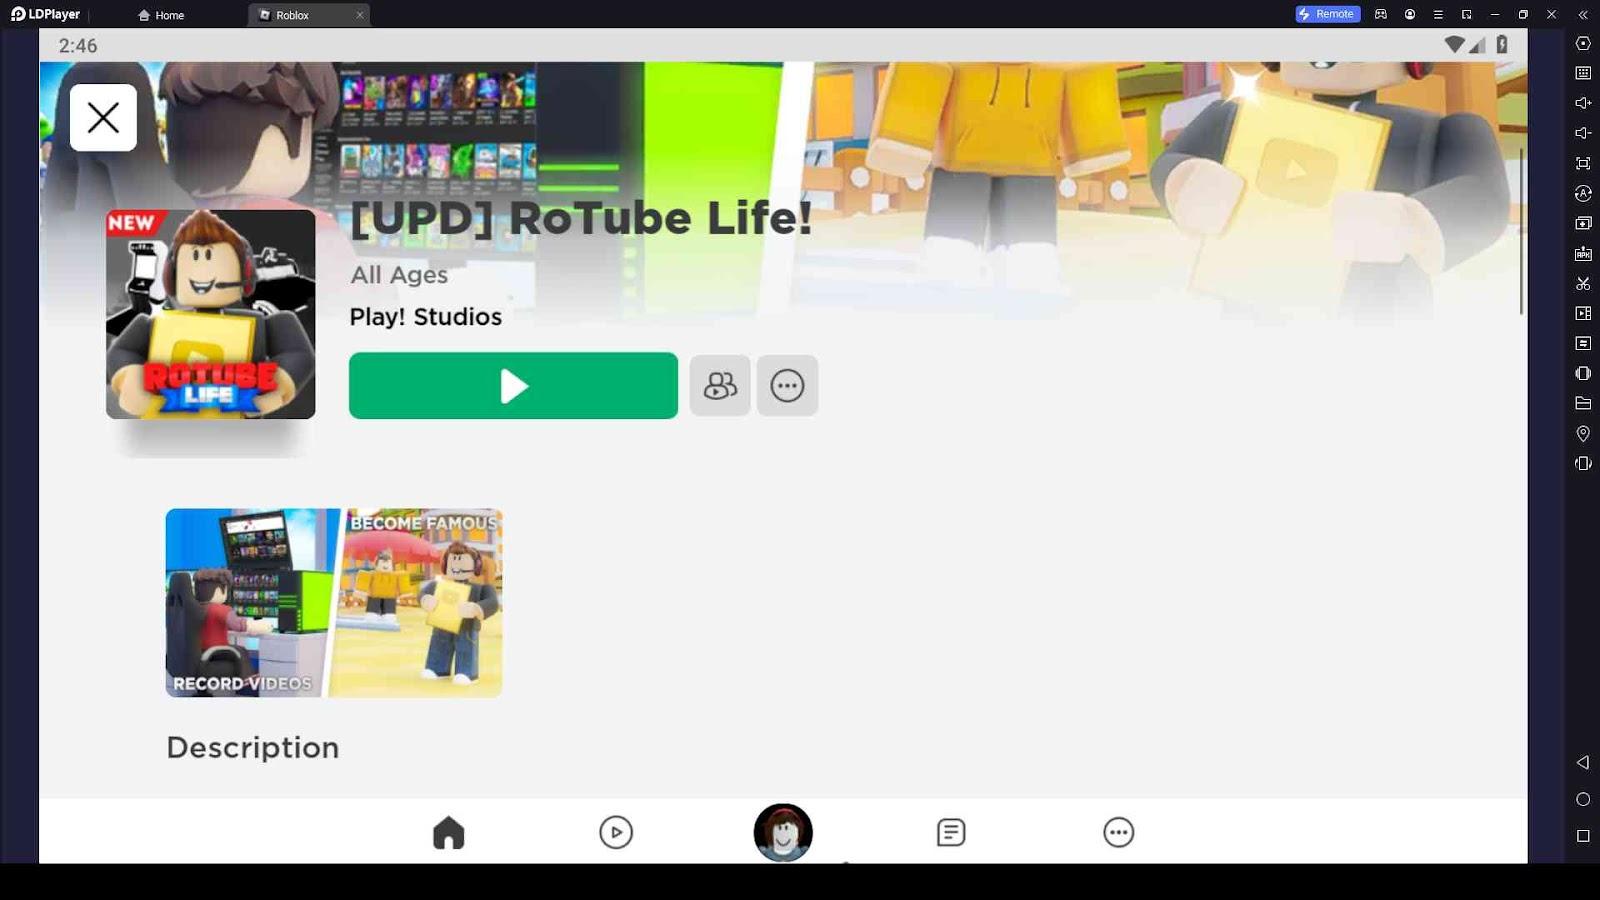 Life, RoTube Life, Roblox GAME, ALL SECRET CODES, ALL